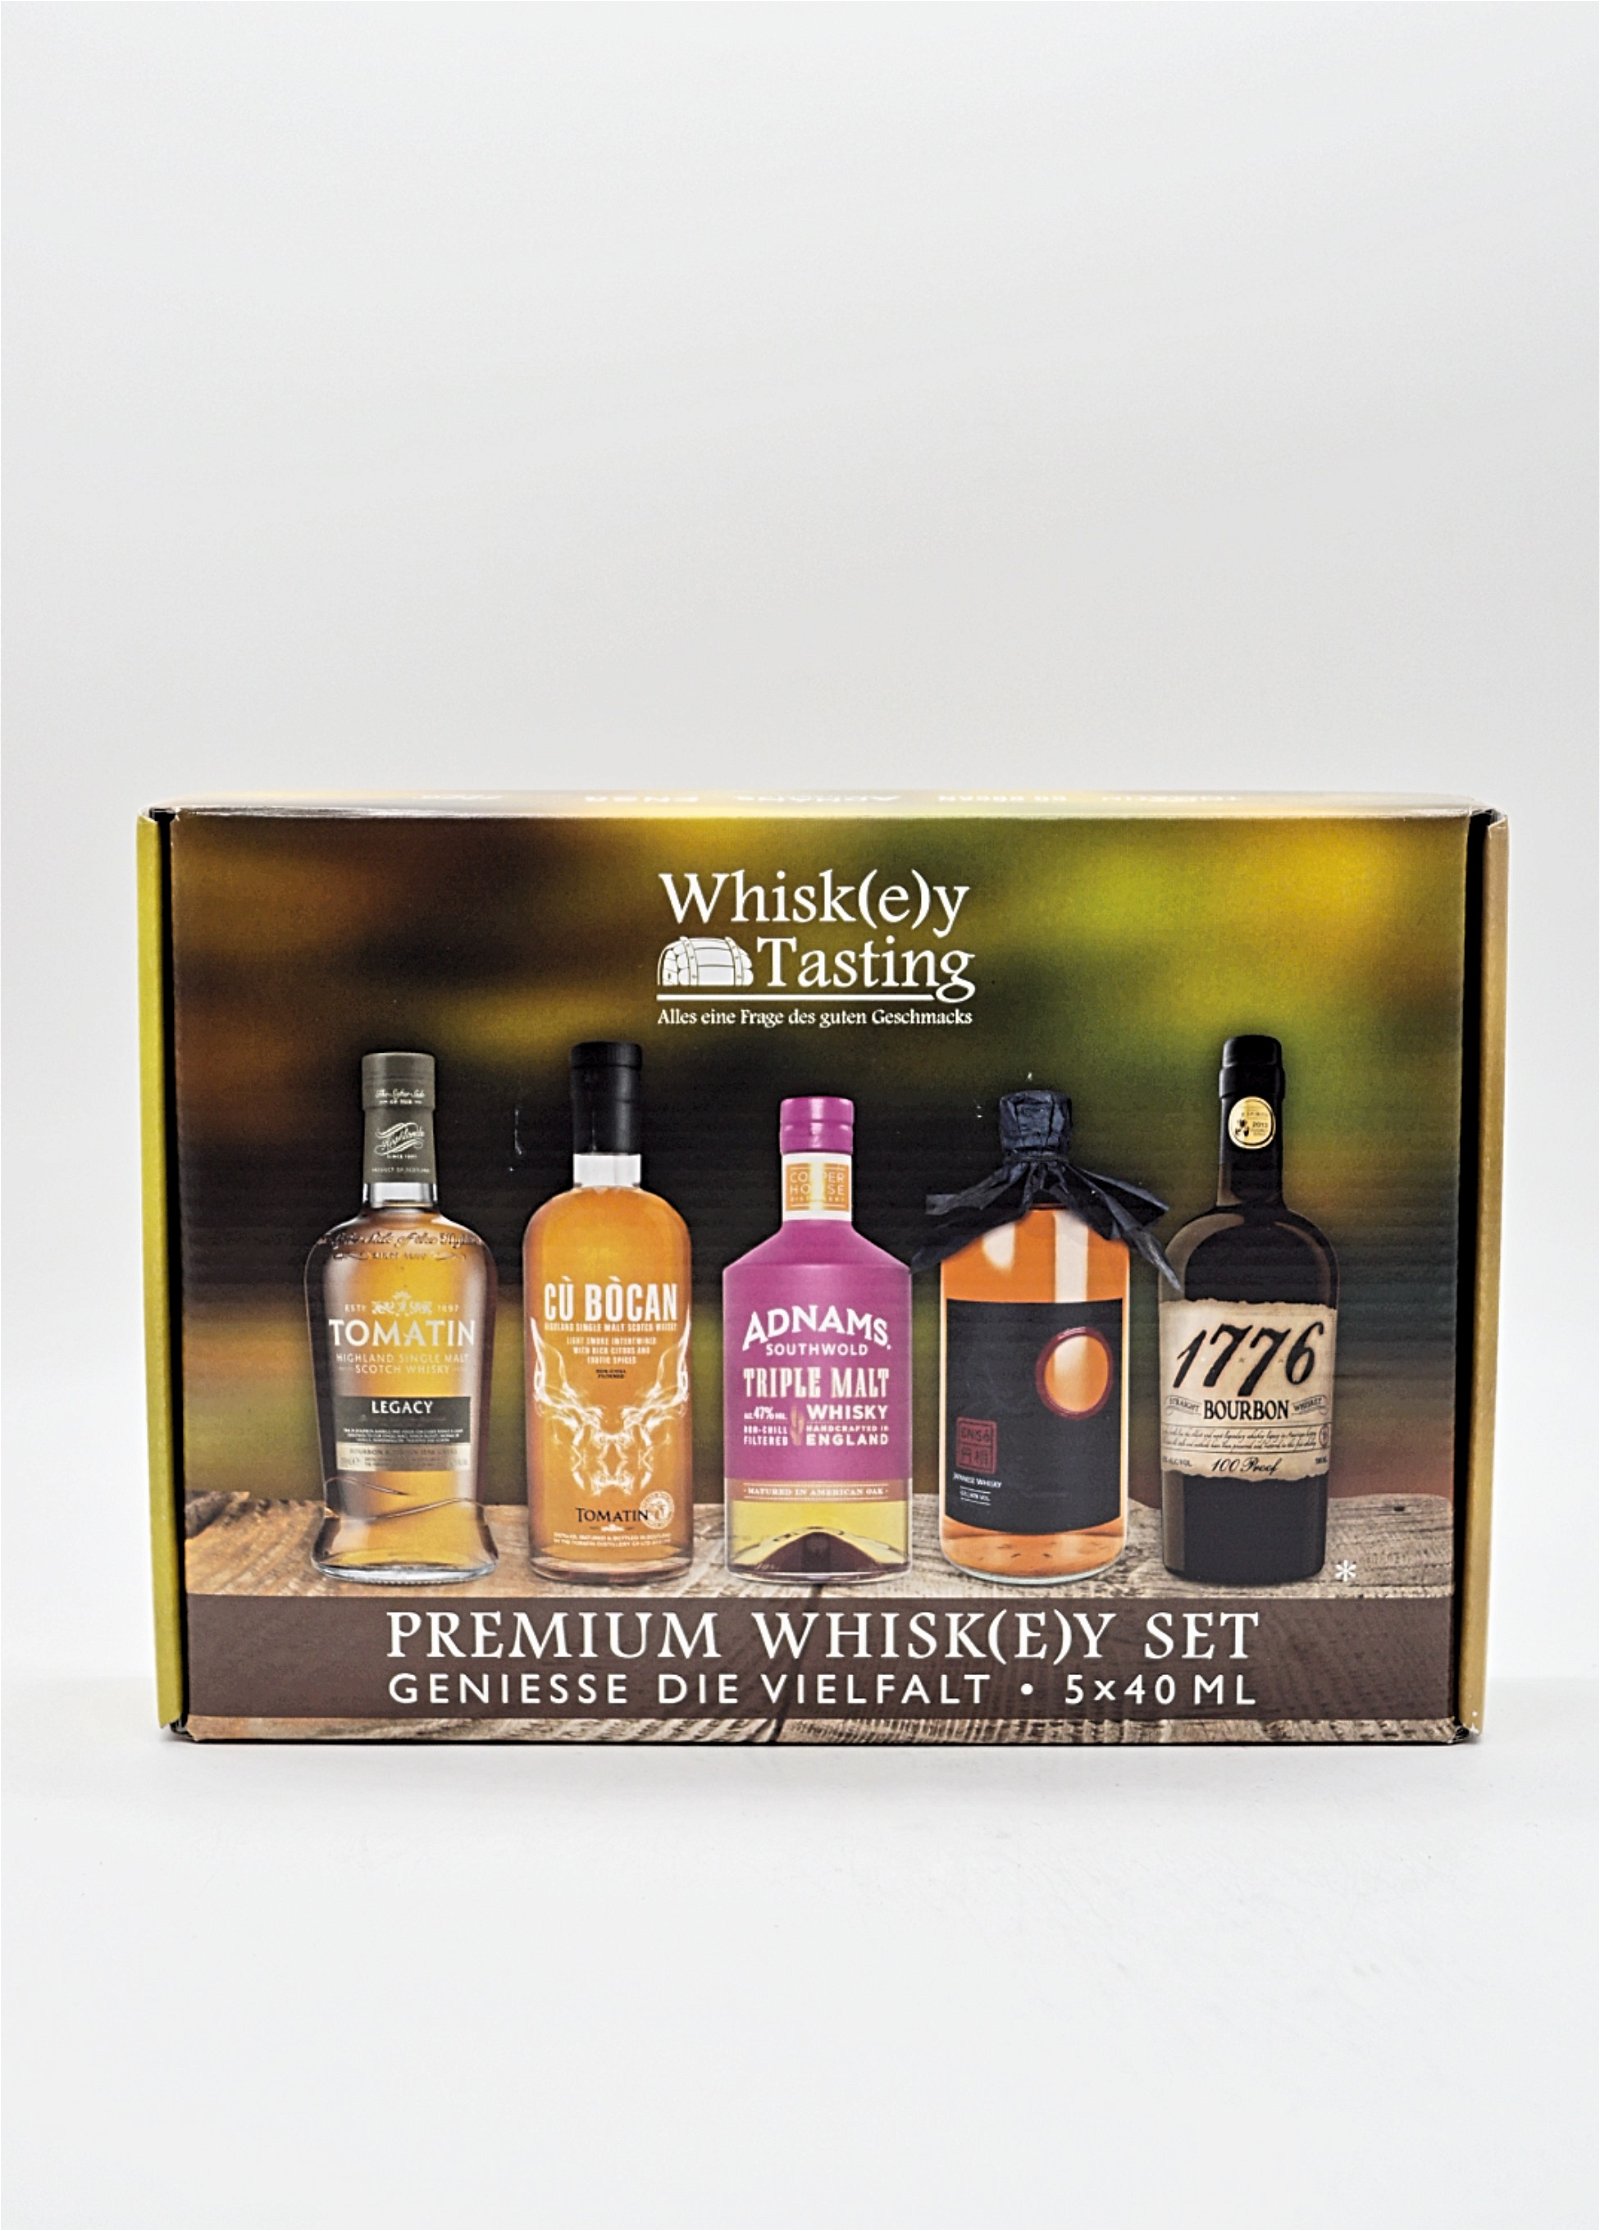 Canadian Club Original Blended Canadian Whisky